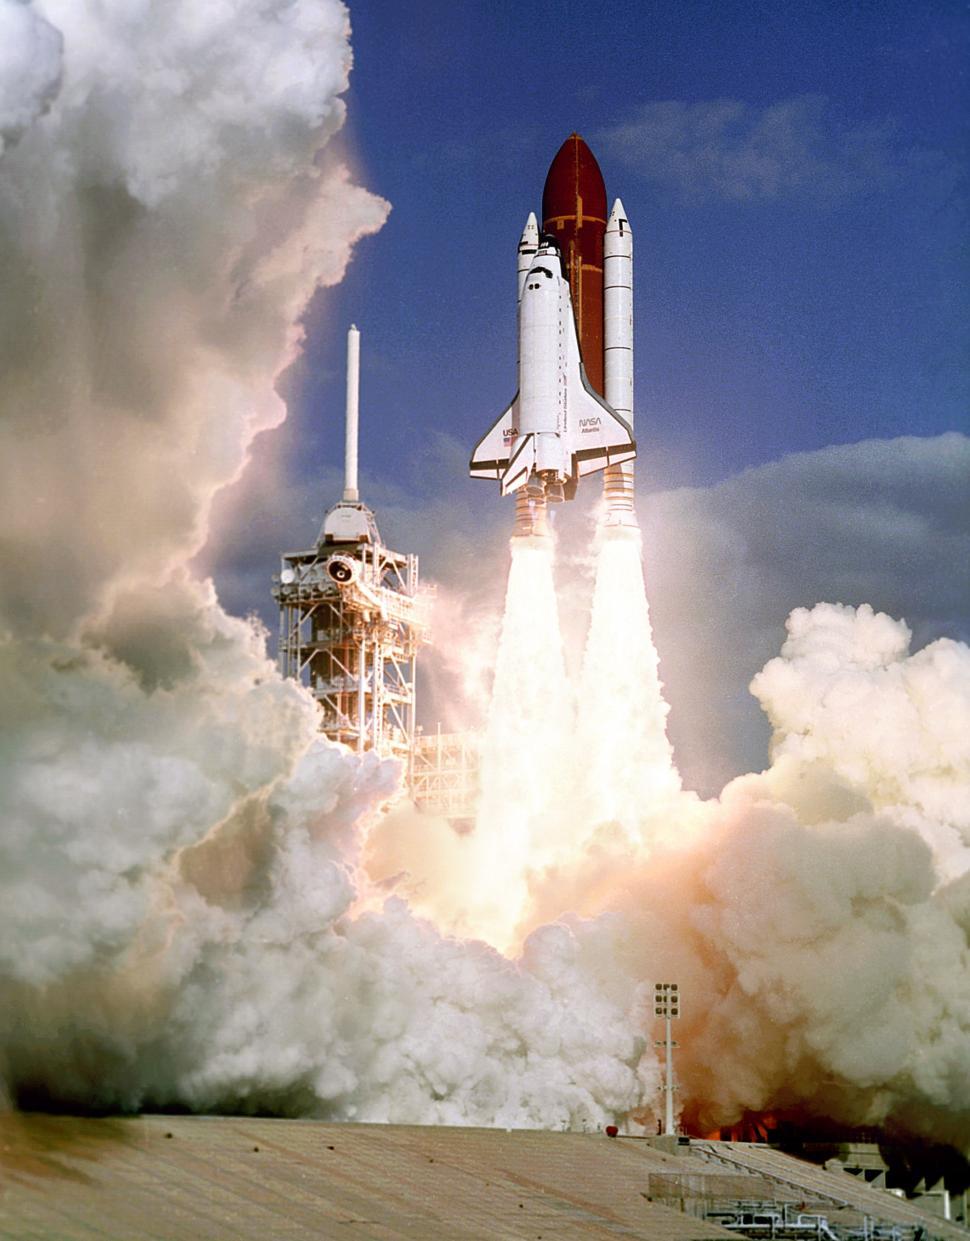 Free Image of Space Shuttle Launching From Launch Pad 